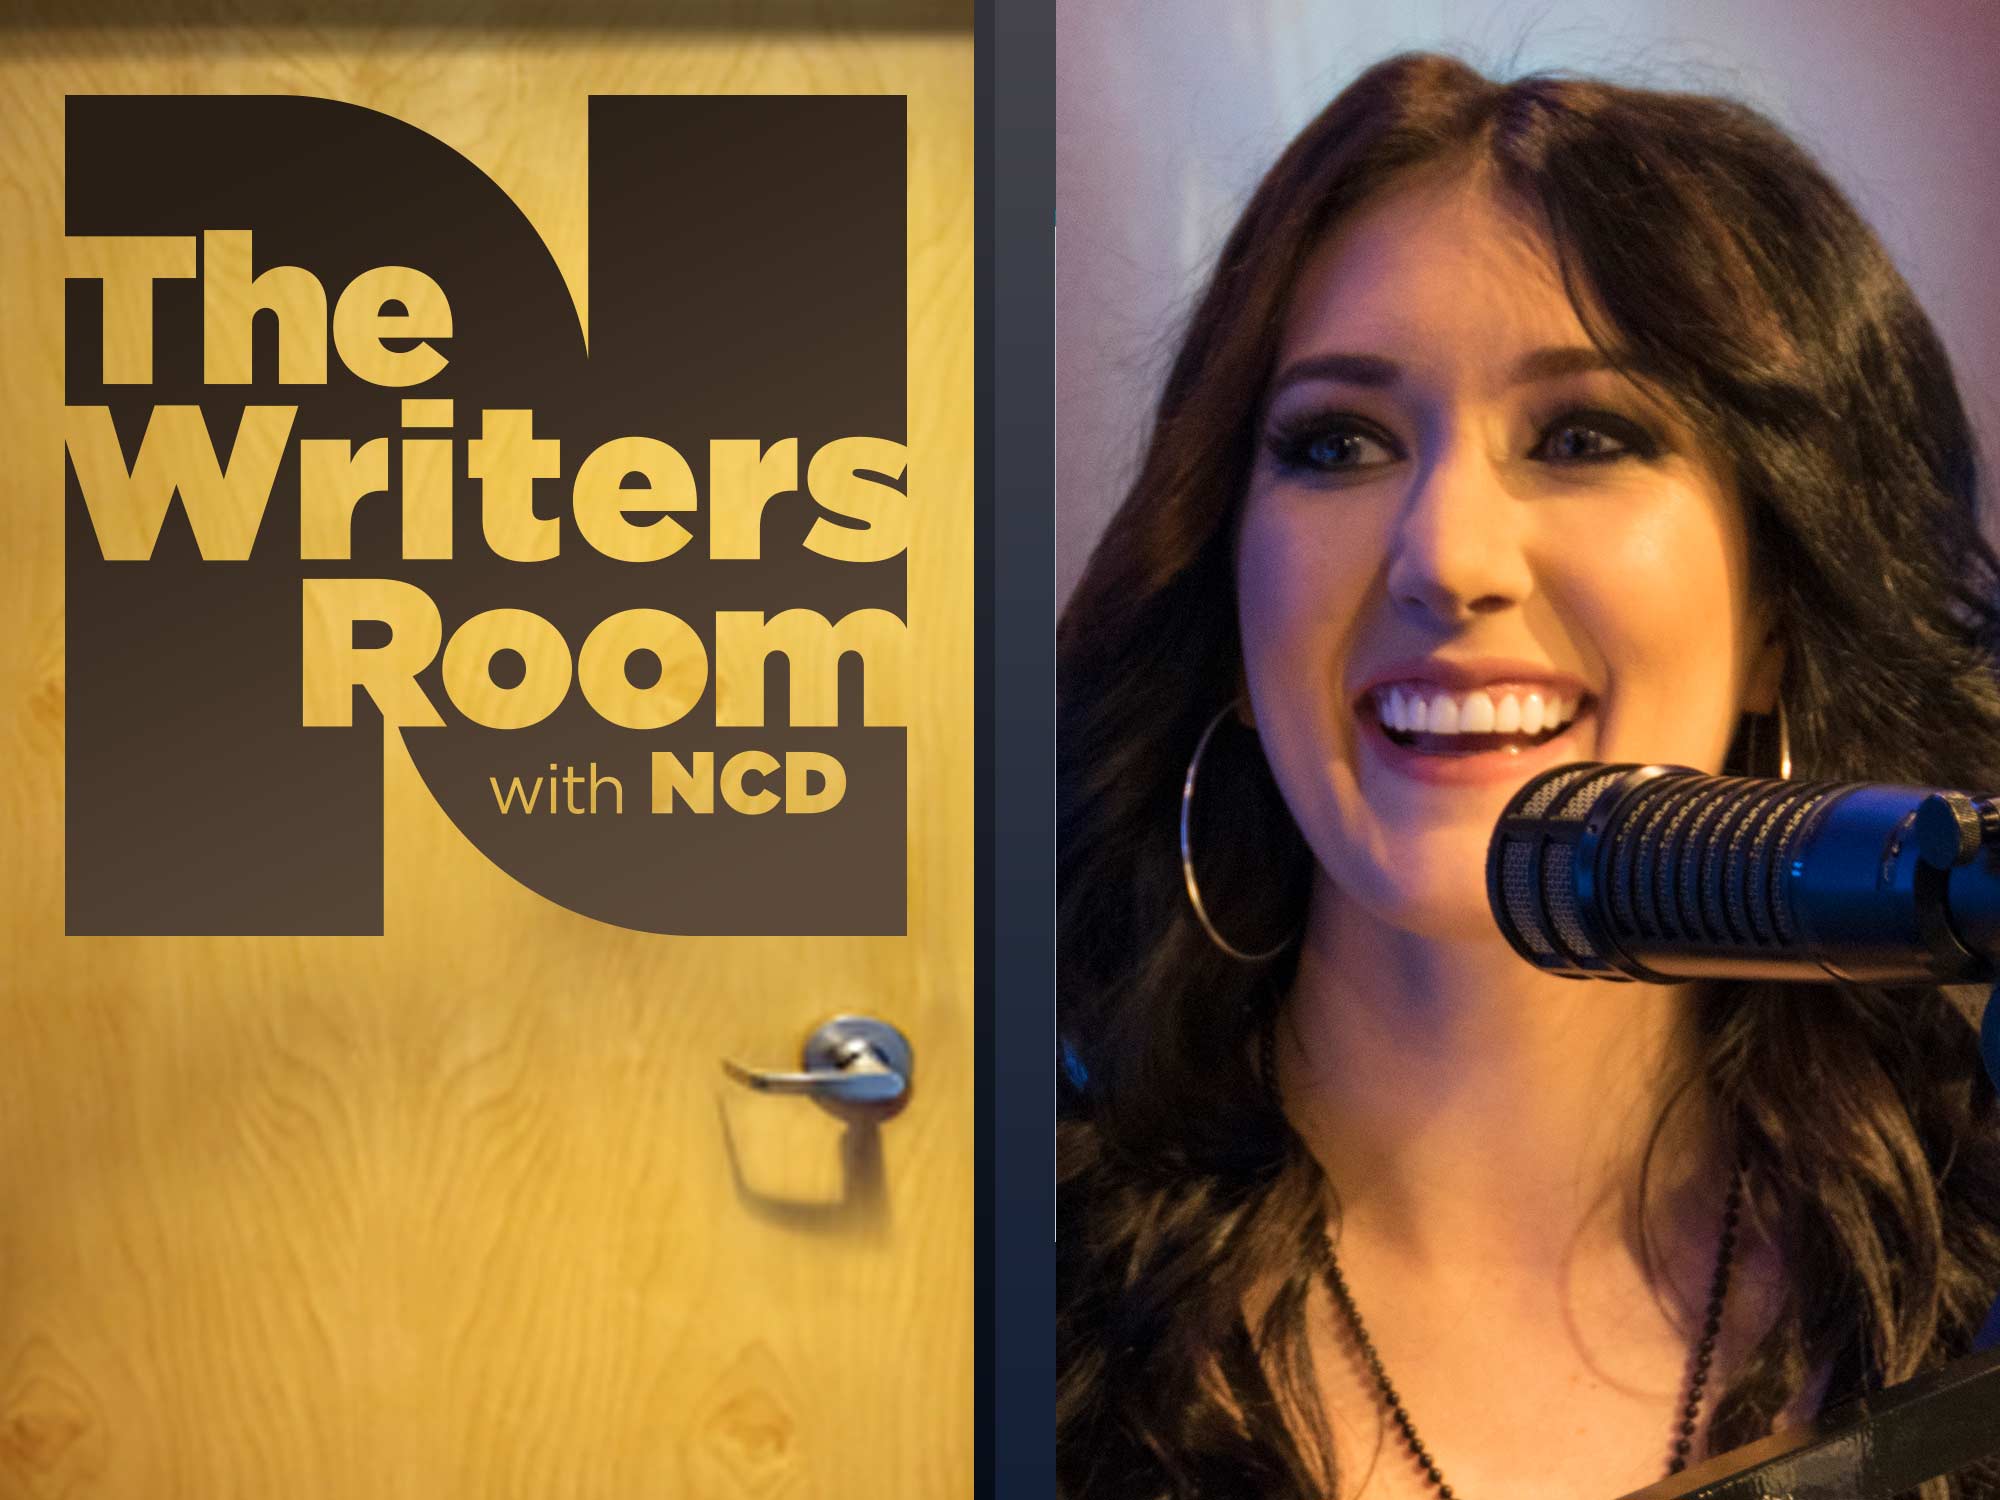 “Garage Country” Artist Aubrie Sellers Talks About Her Unique Sound, New Album and More